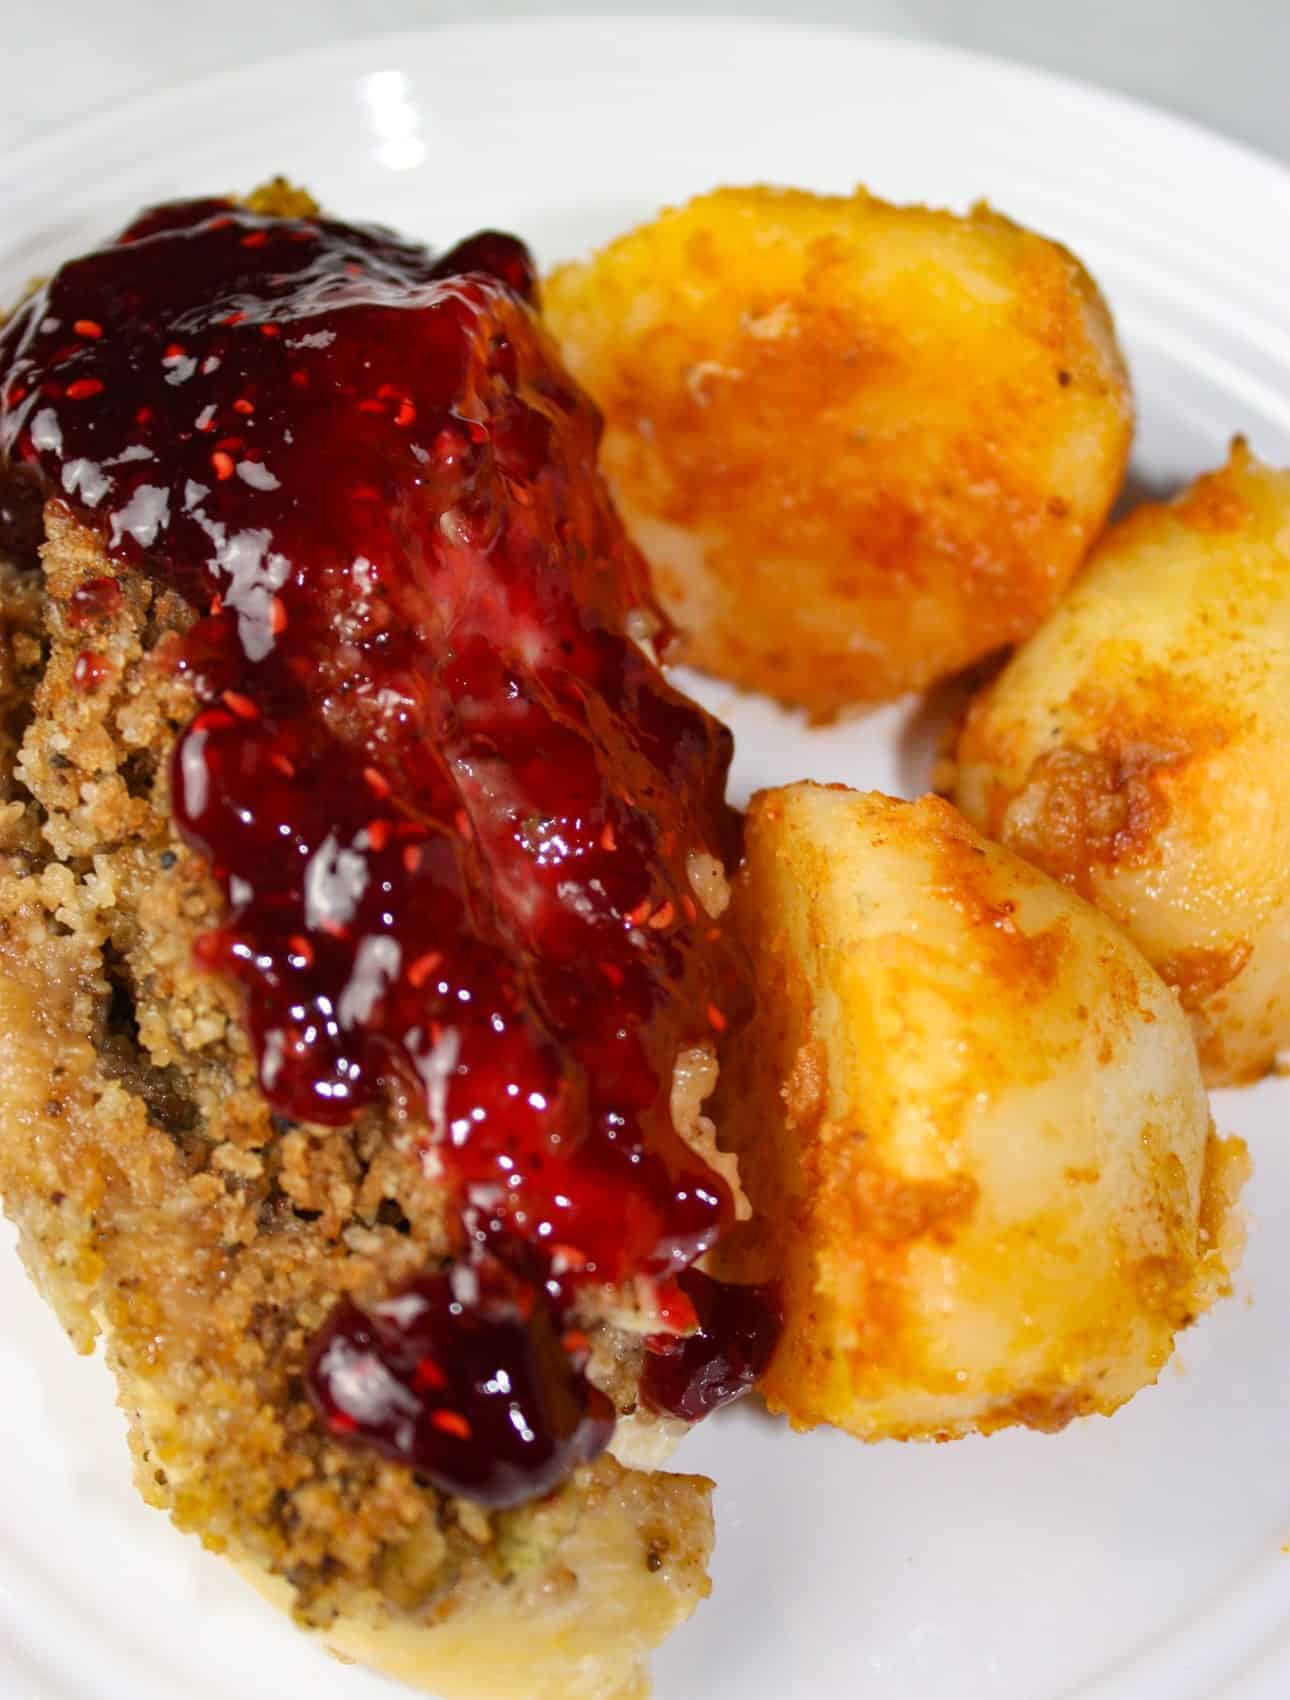 Instant Pot Stuffed Chicken Breasts and Seasoned Potatoes is a gourmet style meal that is very appealing when plated.  Each chicken breast is loaded with gluten free stuffing and then smothered in a tangy raspberry sauce.  